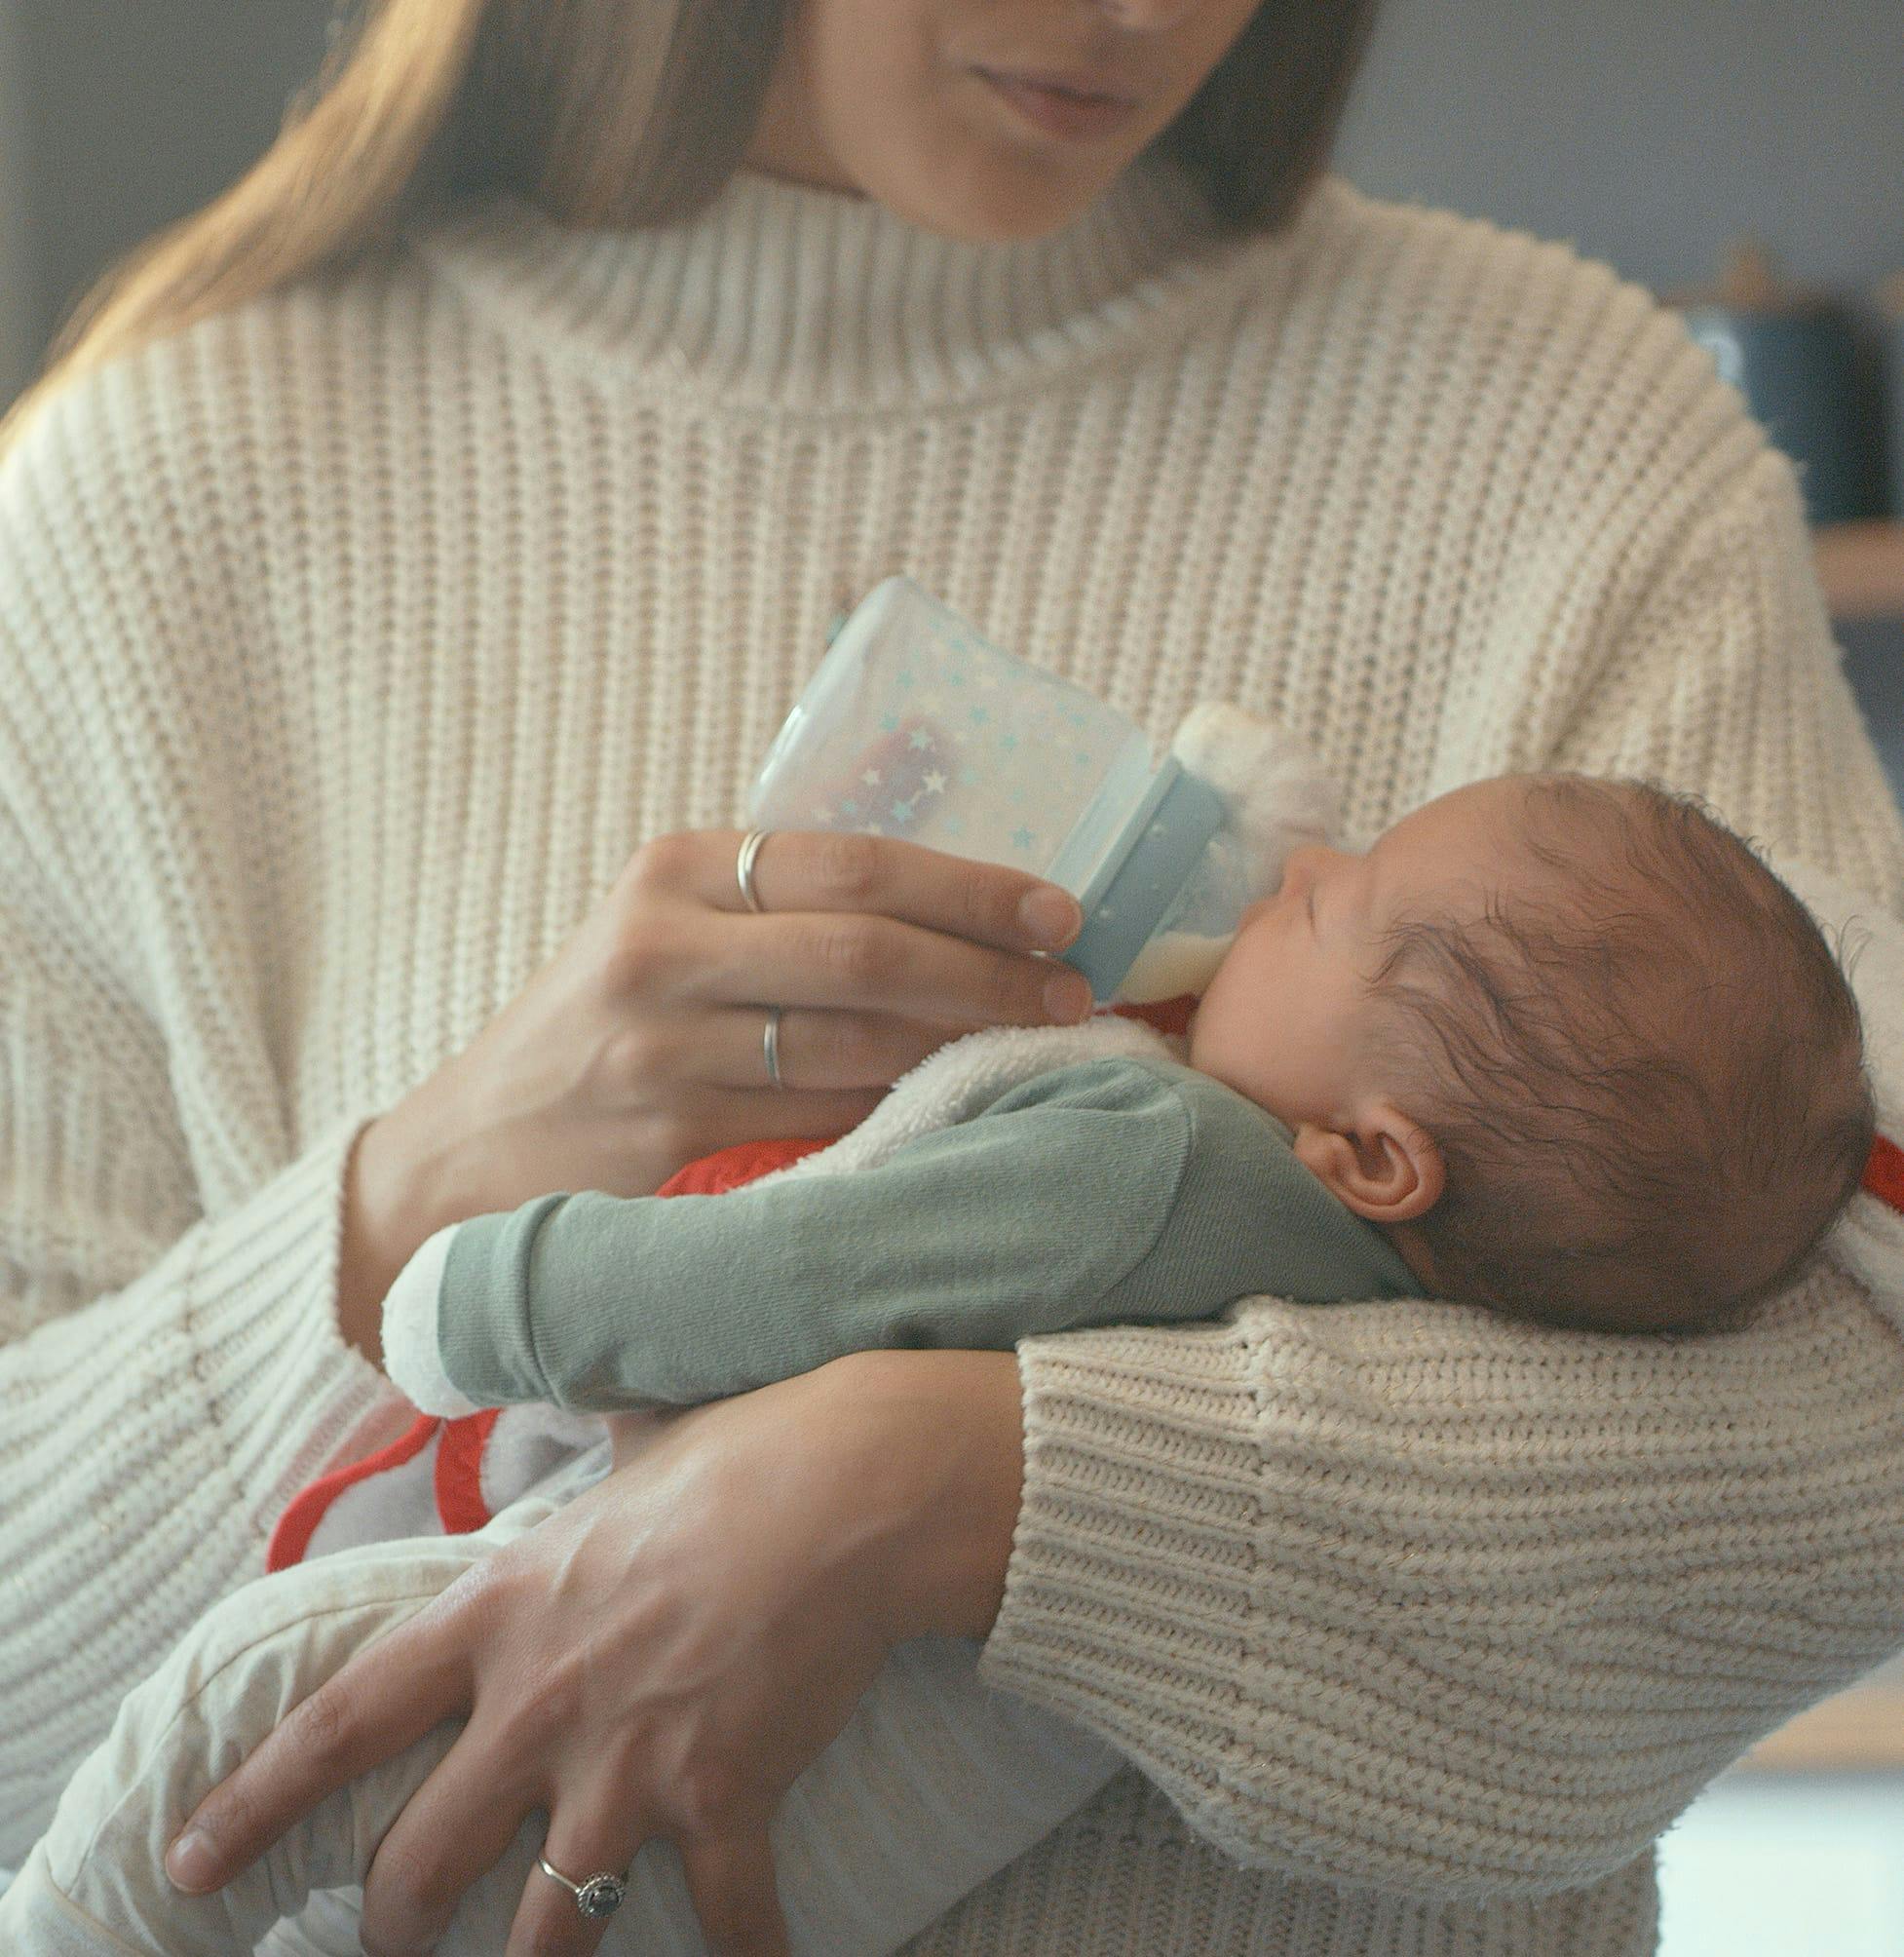 woman holding a baby and bottle in her arms